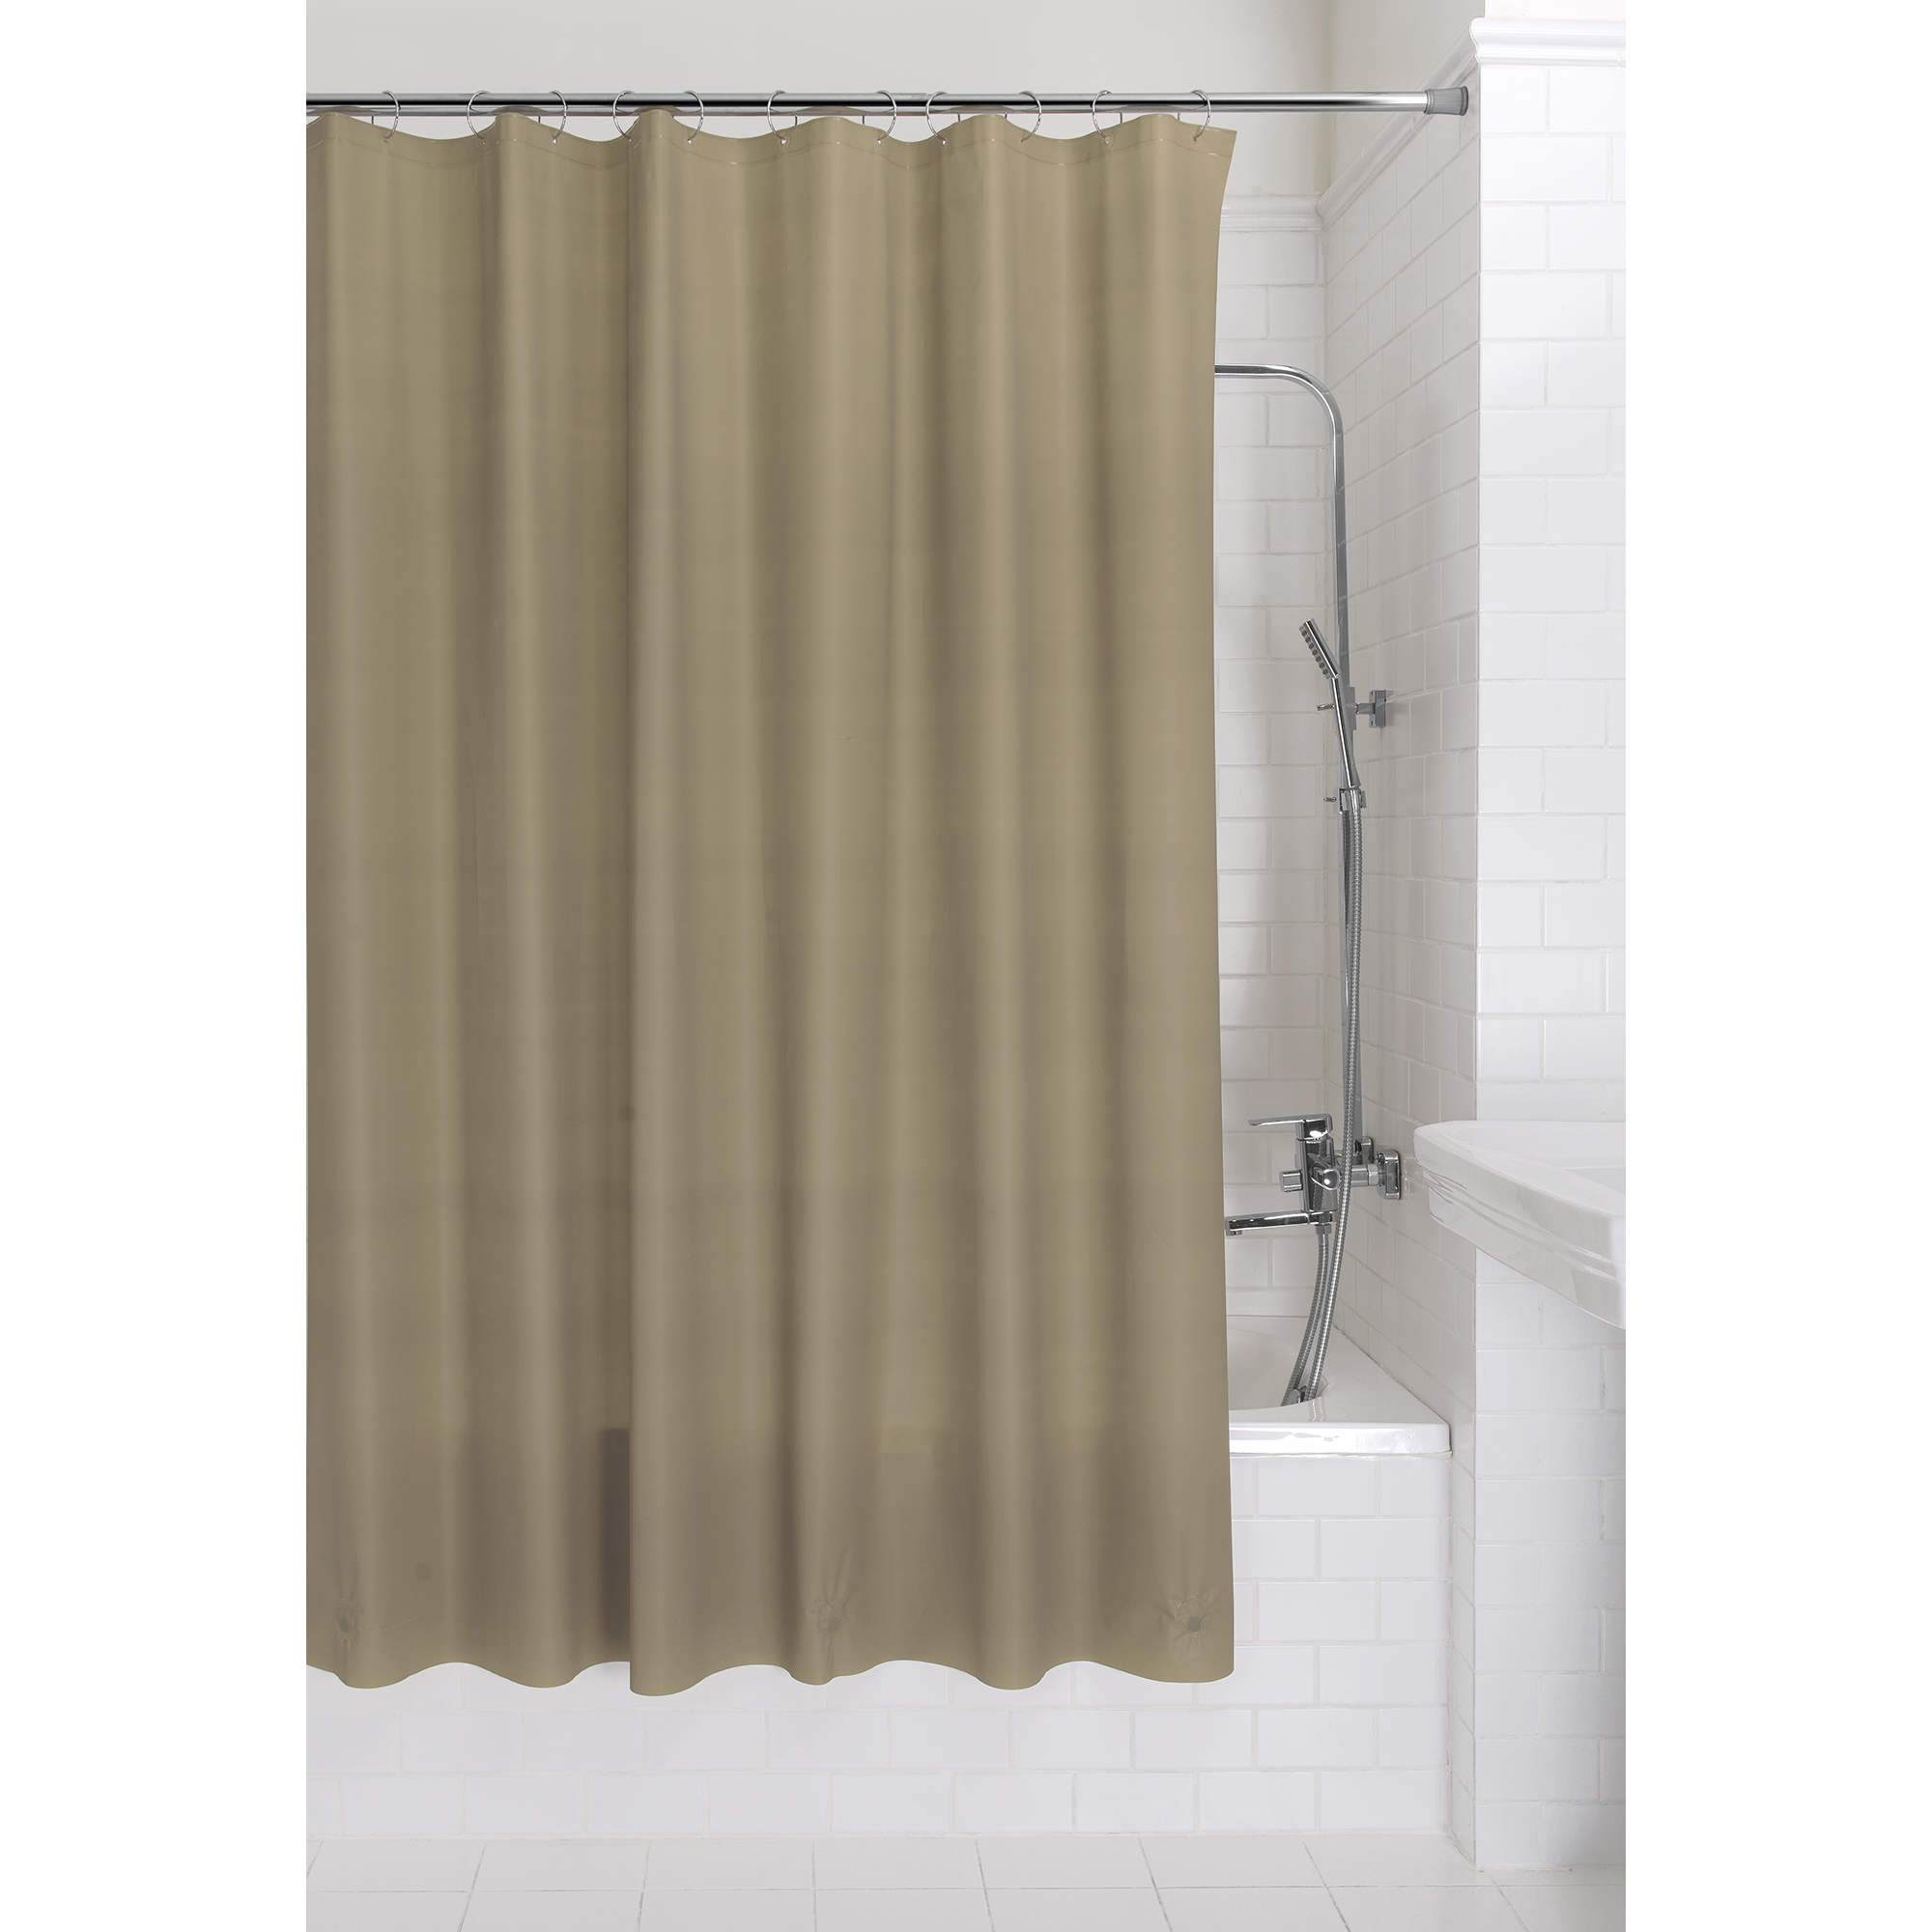 Light Weight PEVA Shower Curtain Liner, Weighted Magnetic Hem, Brown, 70" x 71", Mainstays - image 1 of 7